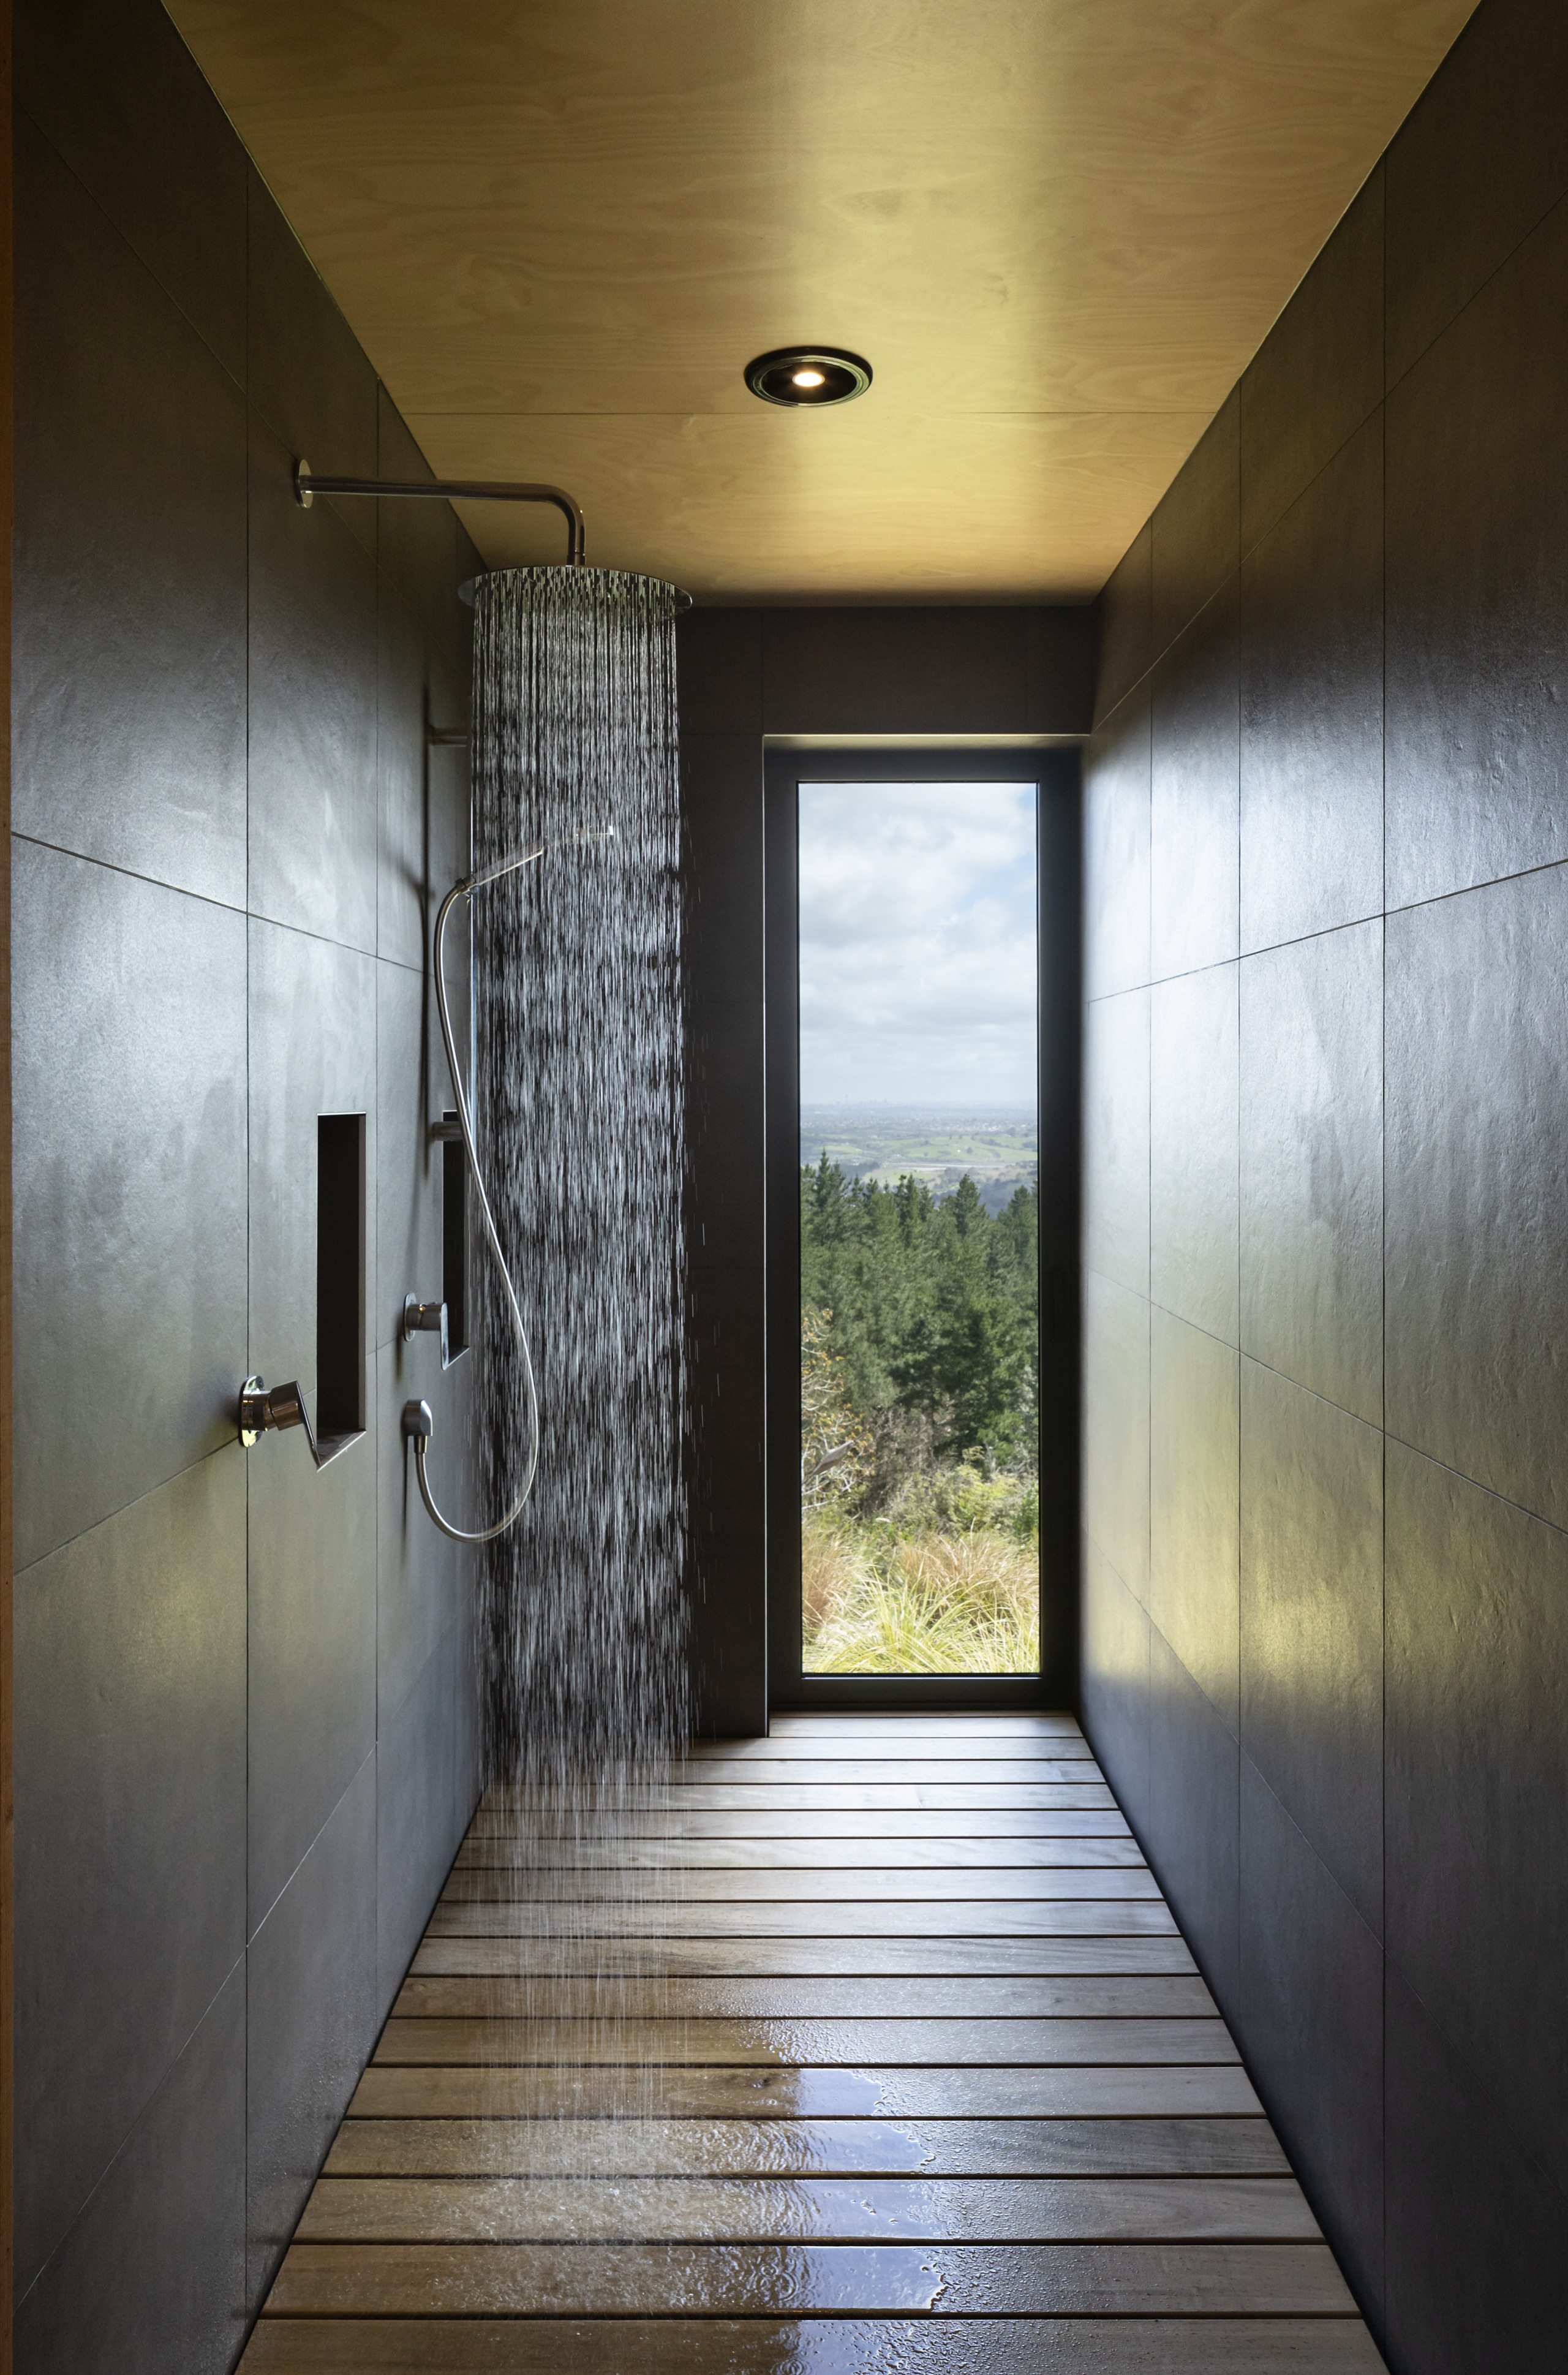 Cocooned in moody, large-scale tiles the shower space 